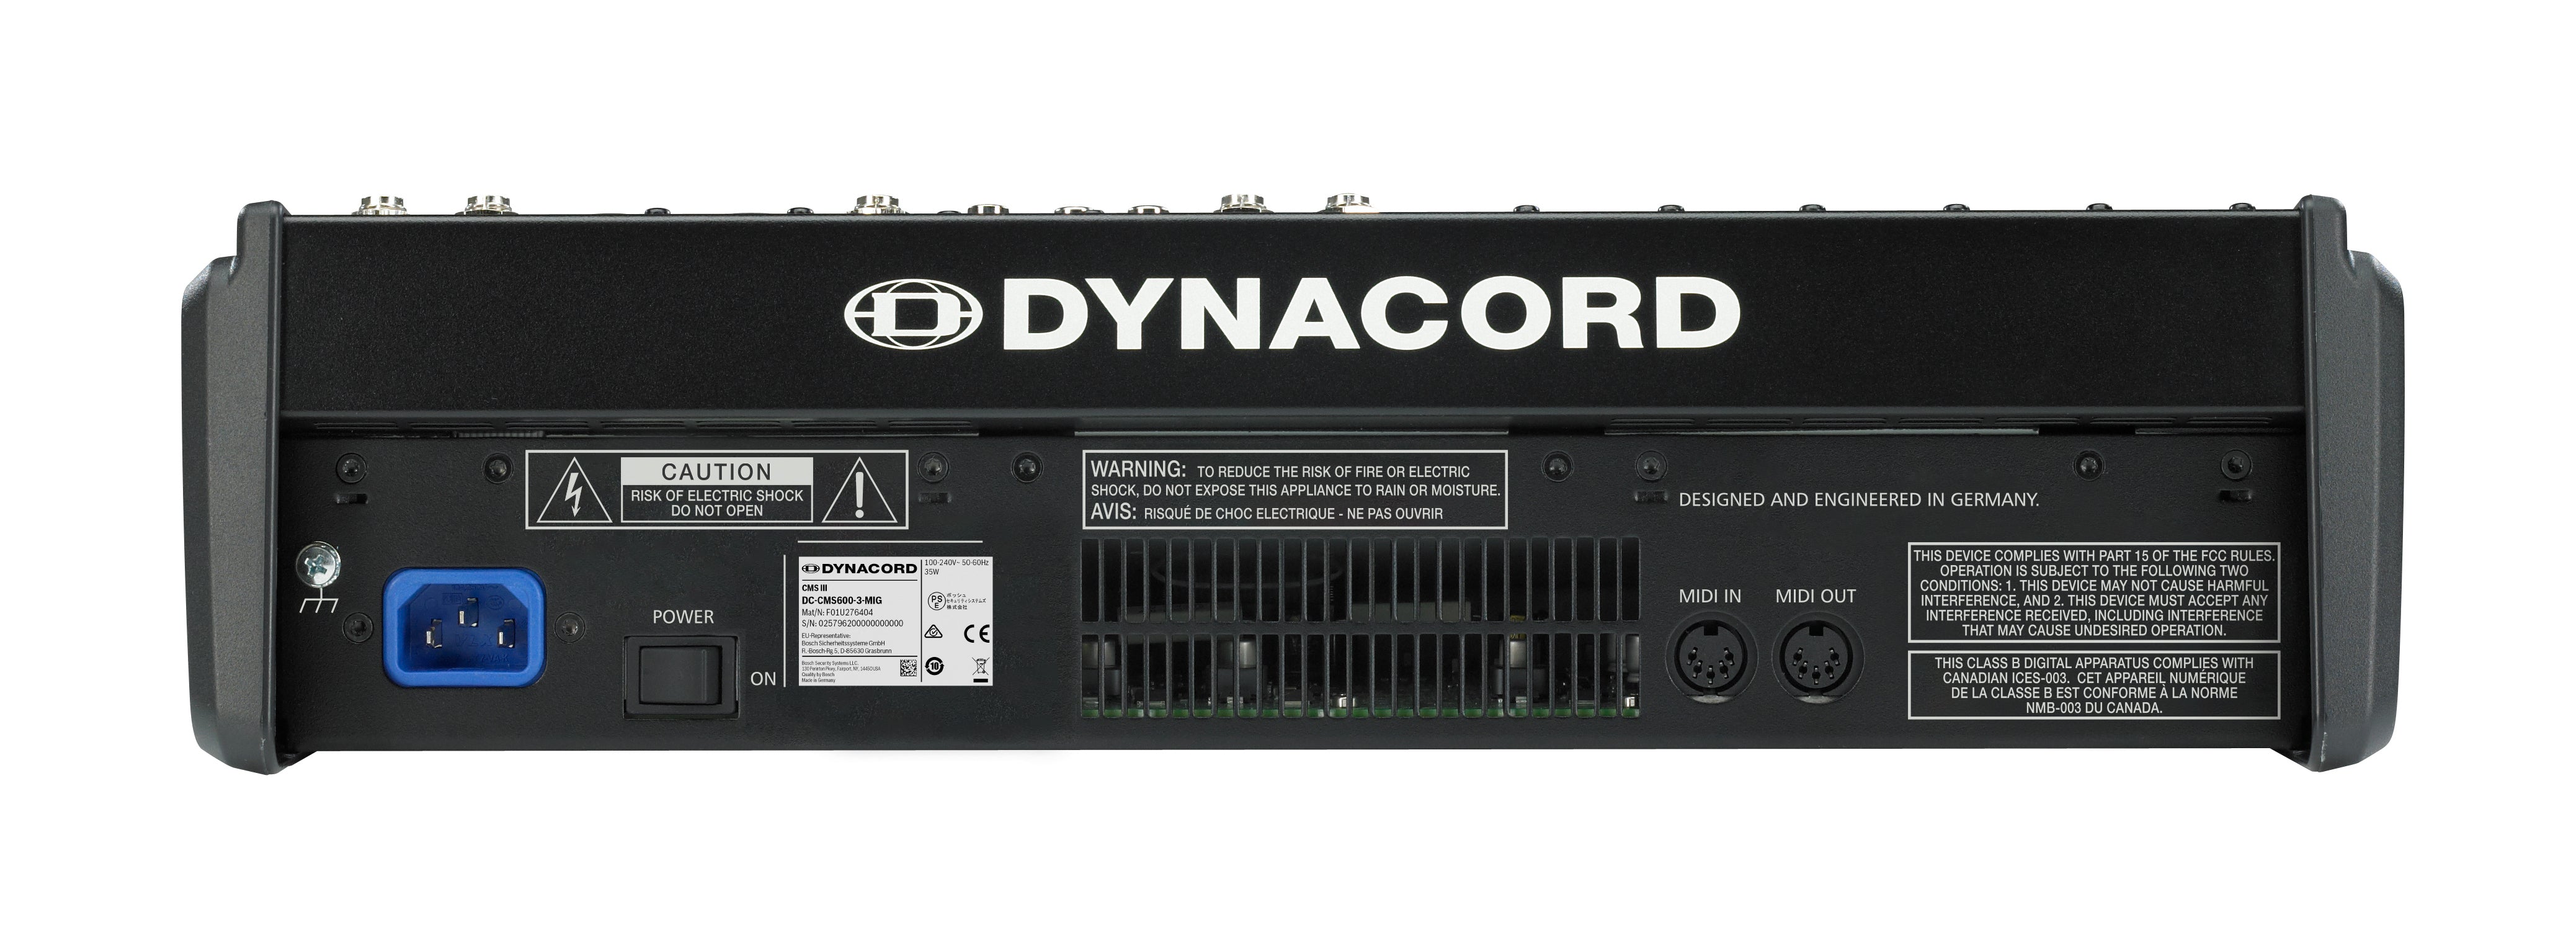 Dynacord CMS 600-3 8‑channel compact mixer